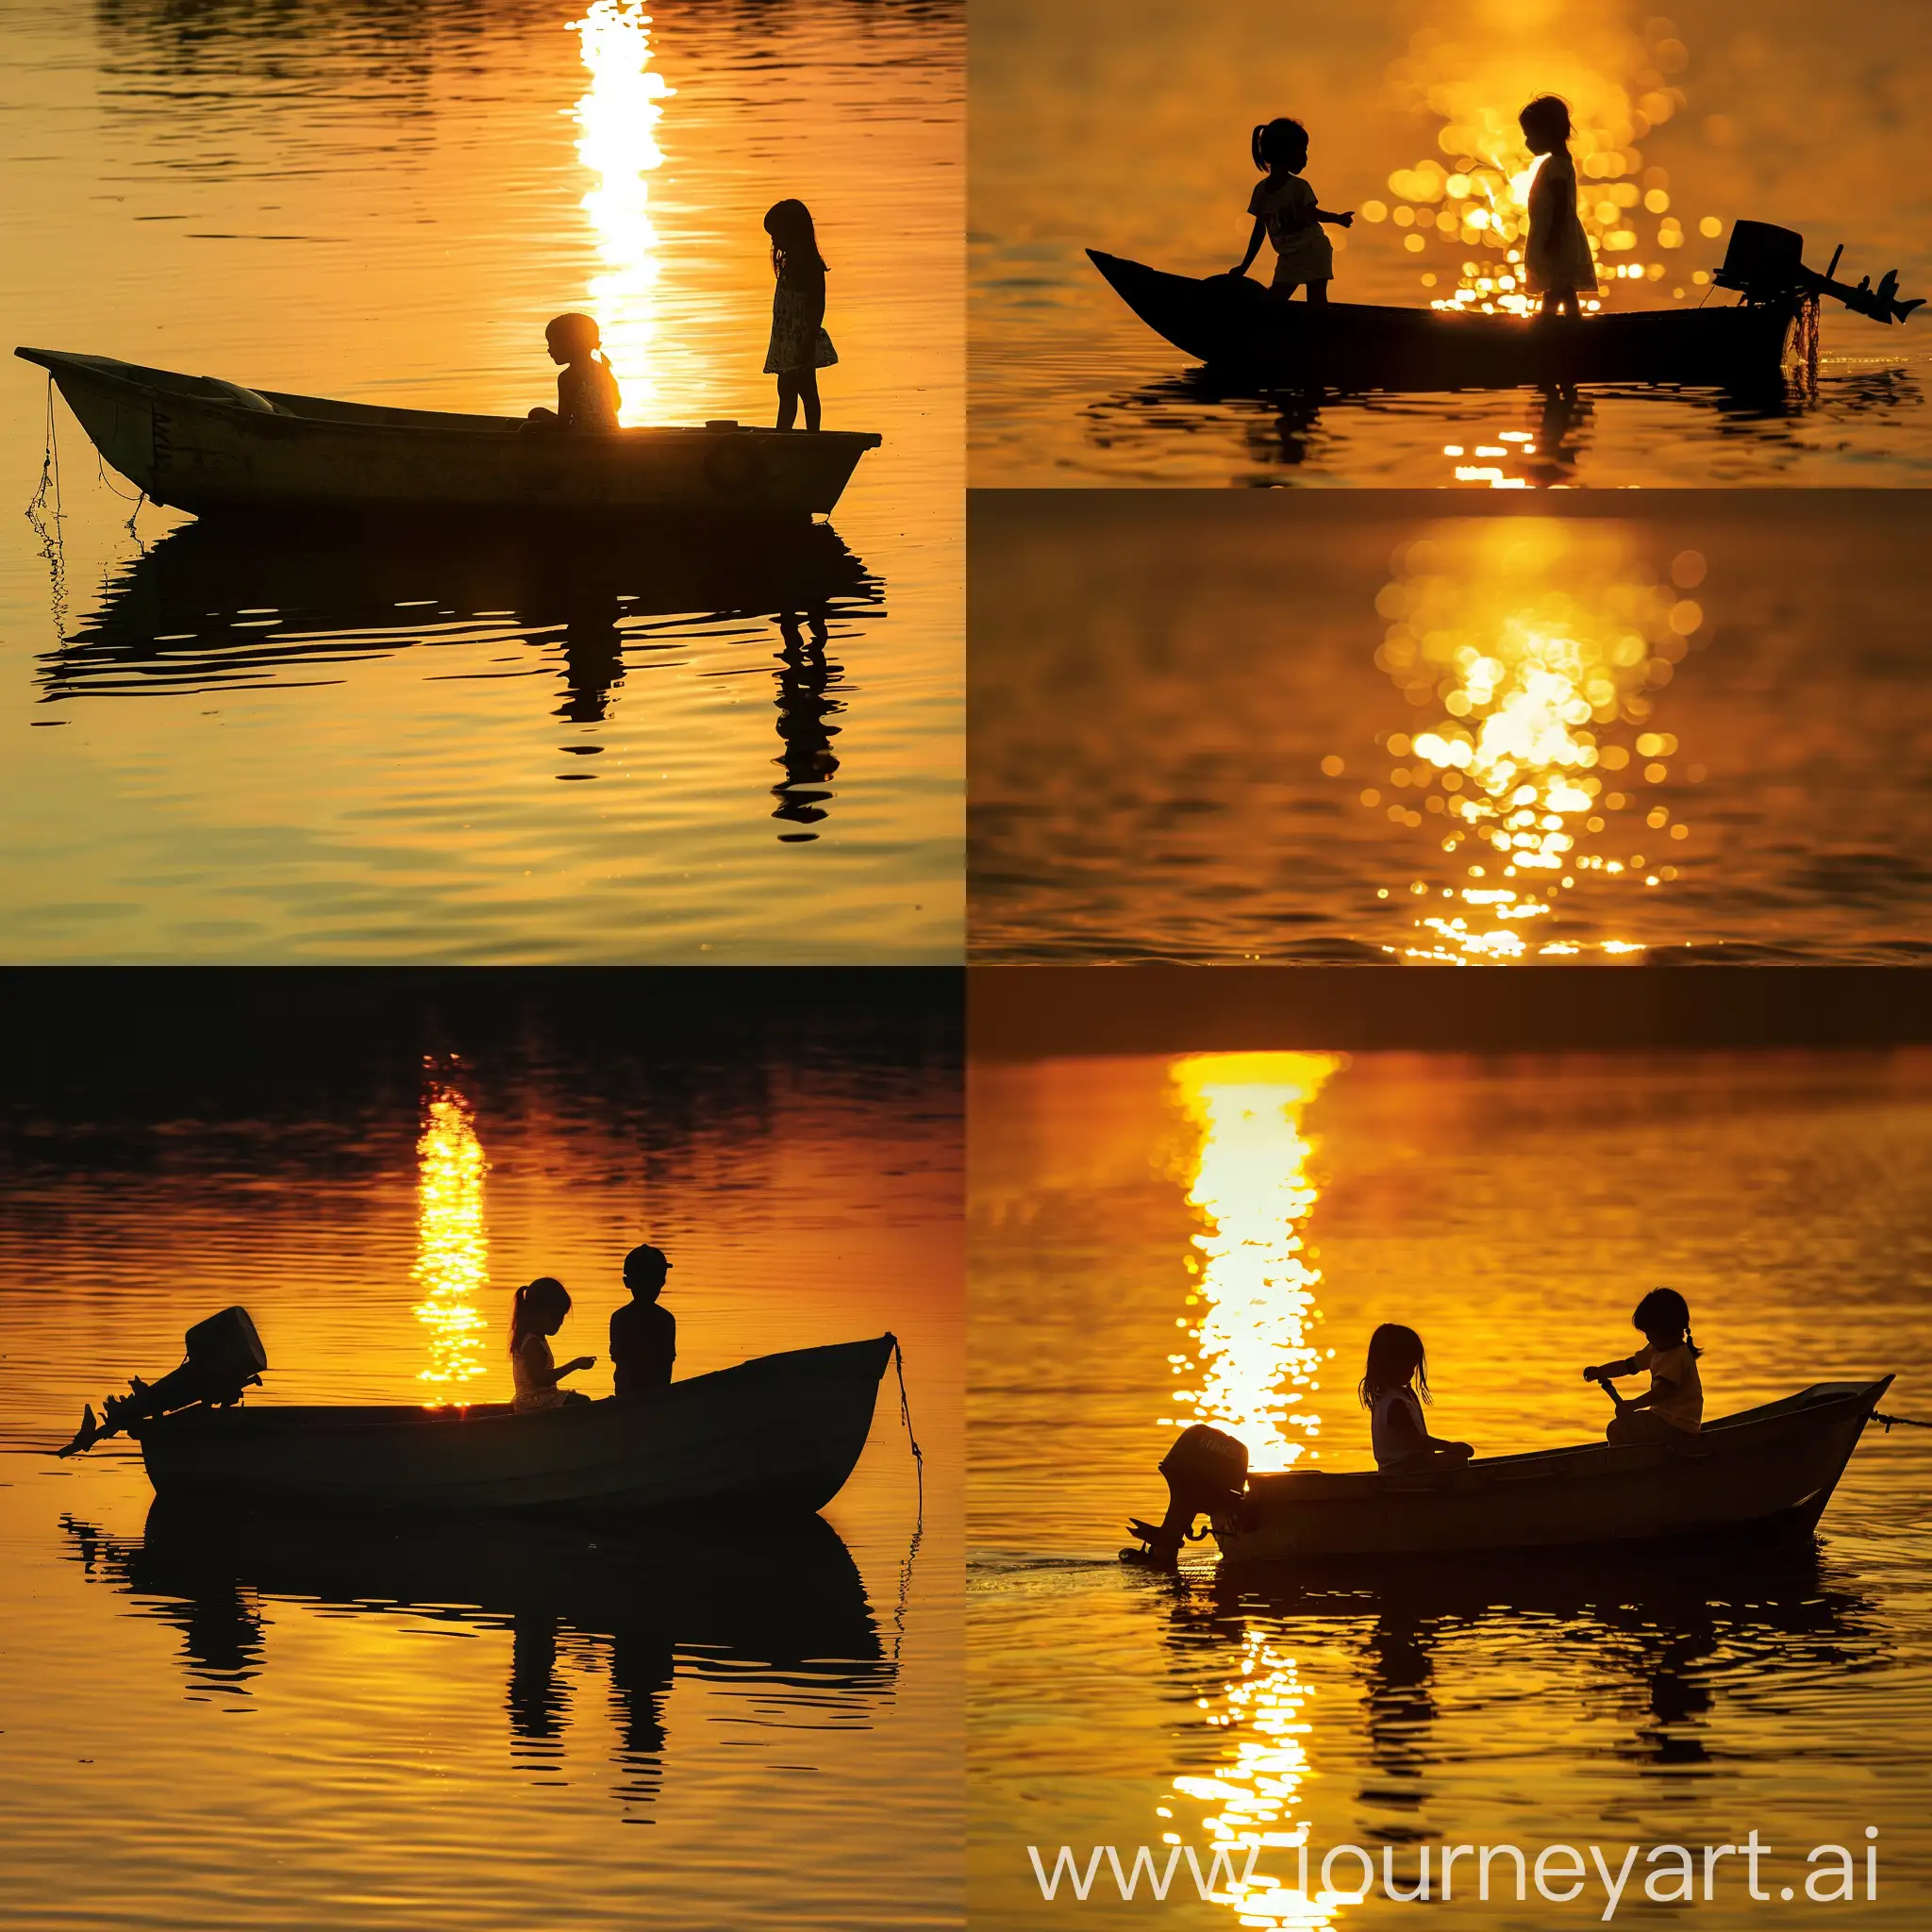 one girl, one boy on a small fishing boat silhouetted at golden hour. Reflections on water. Sunset, golden hour. 16:9 aspect ratio